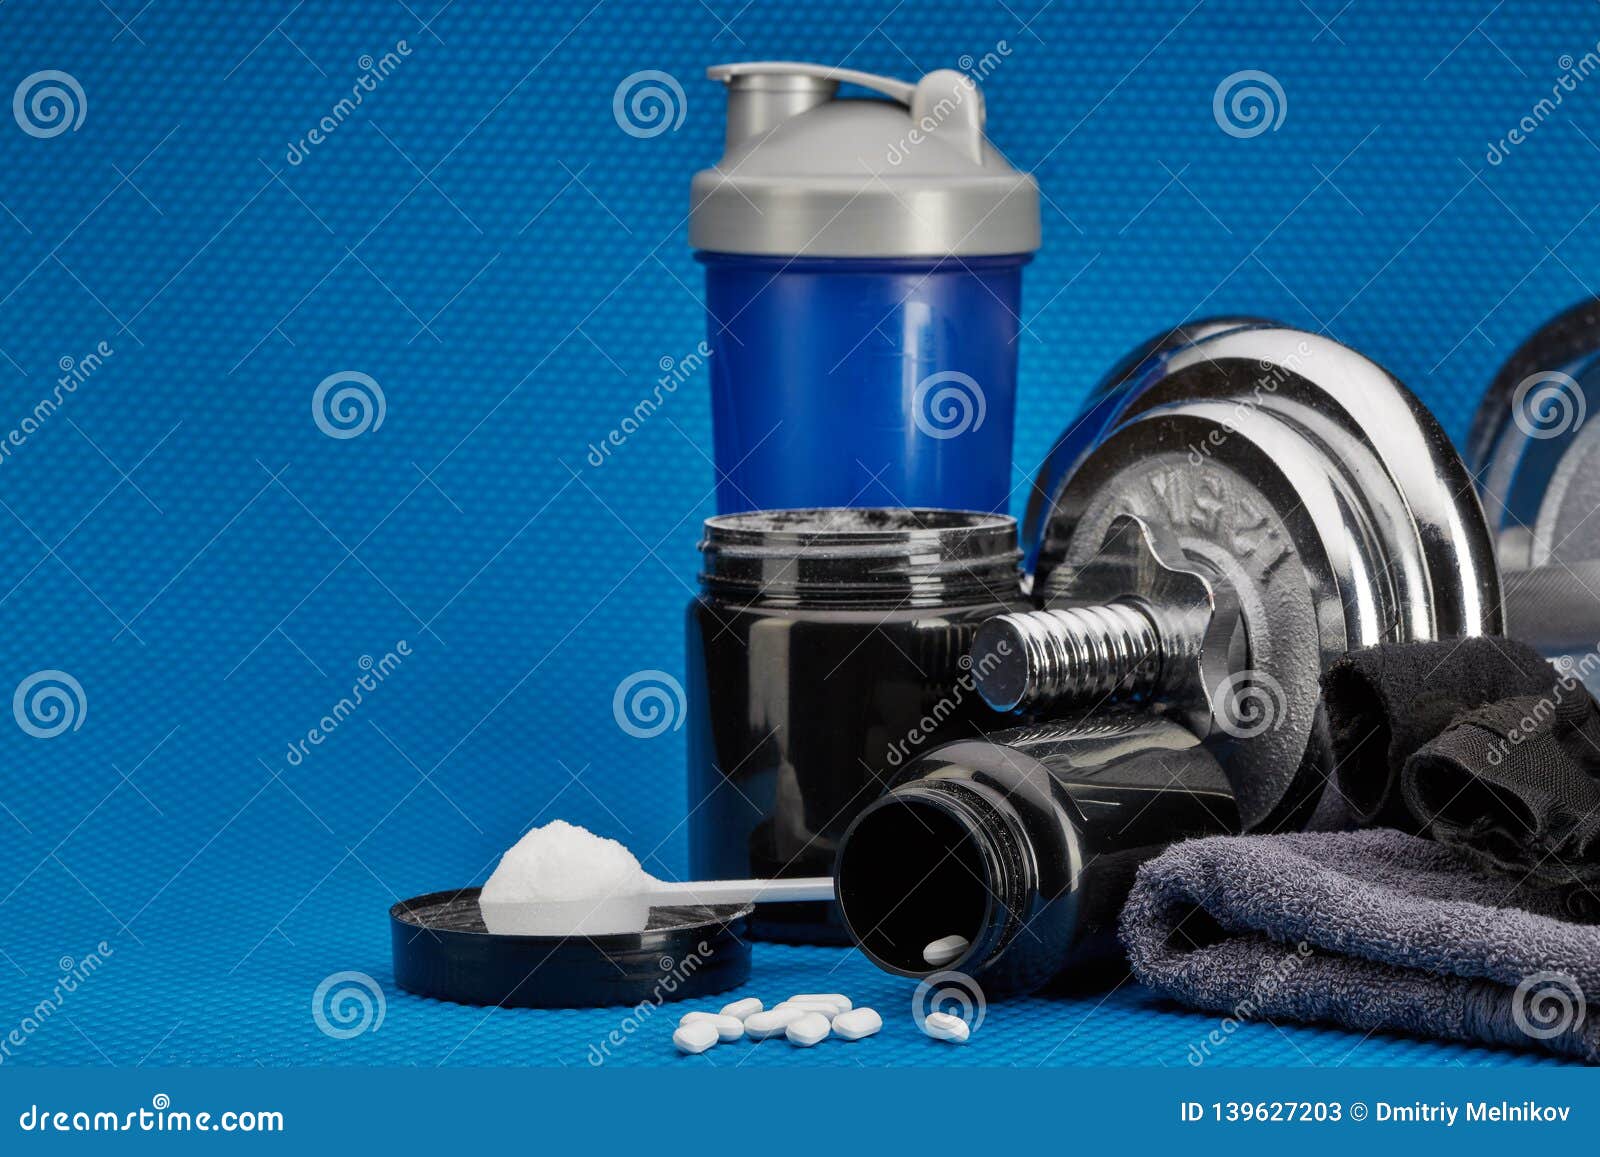 Sports Nutrition And Fitness Equipment Stock Image Image Of